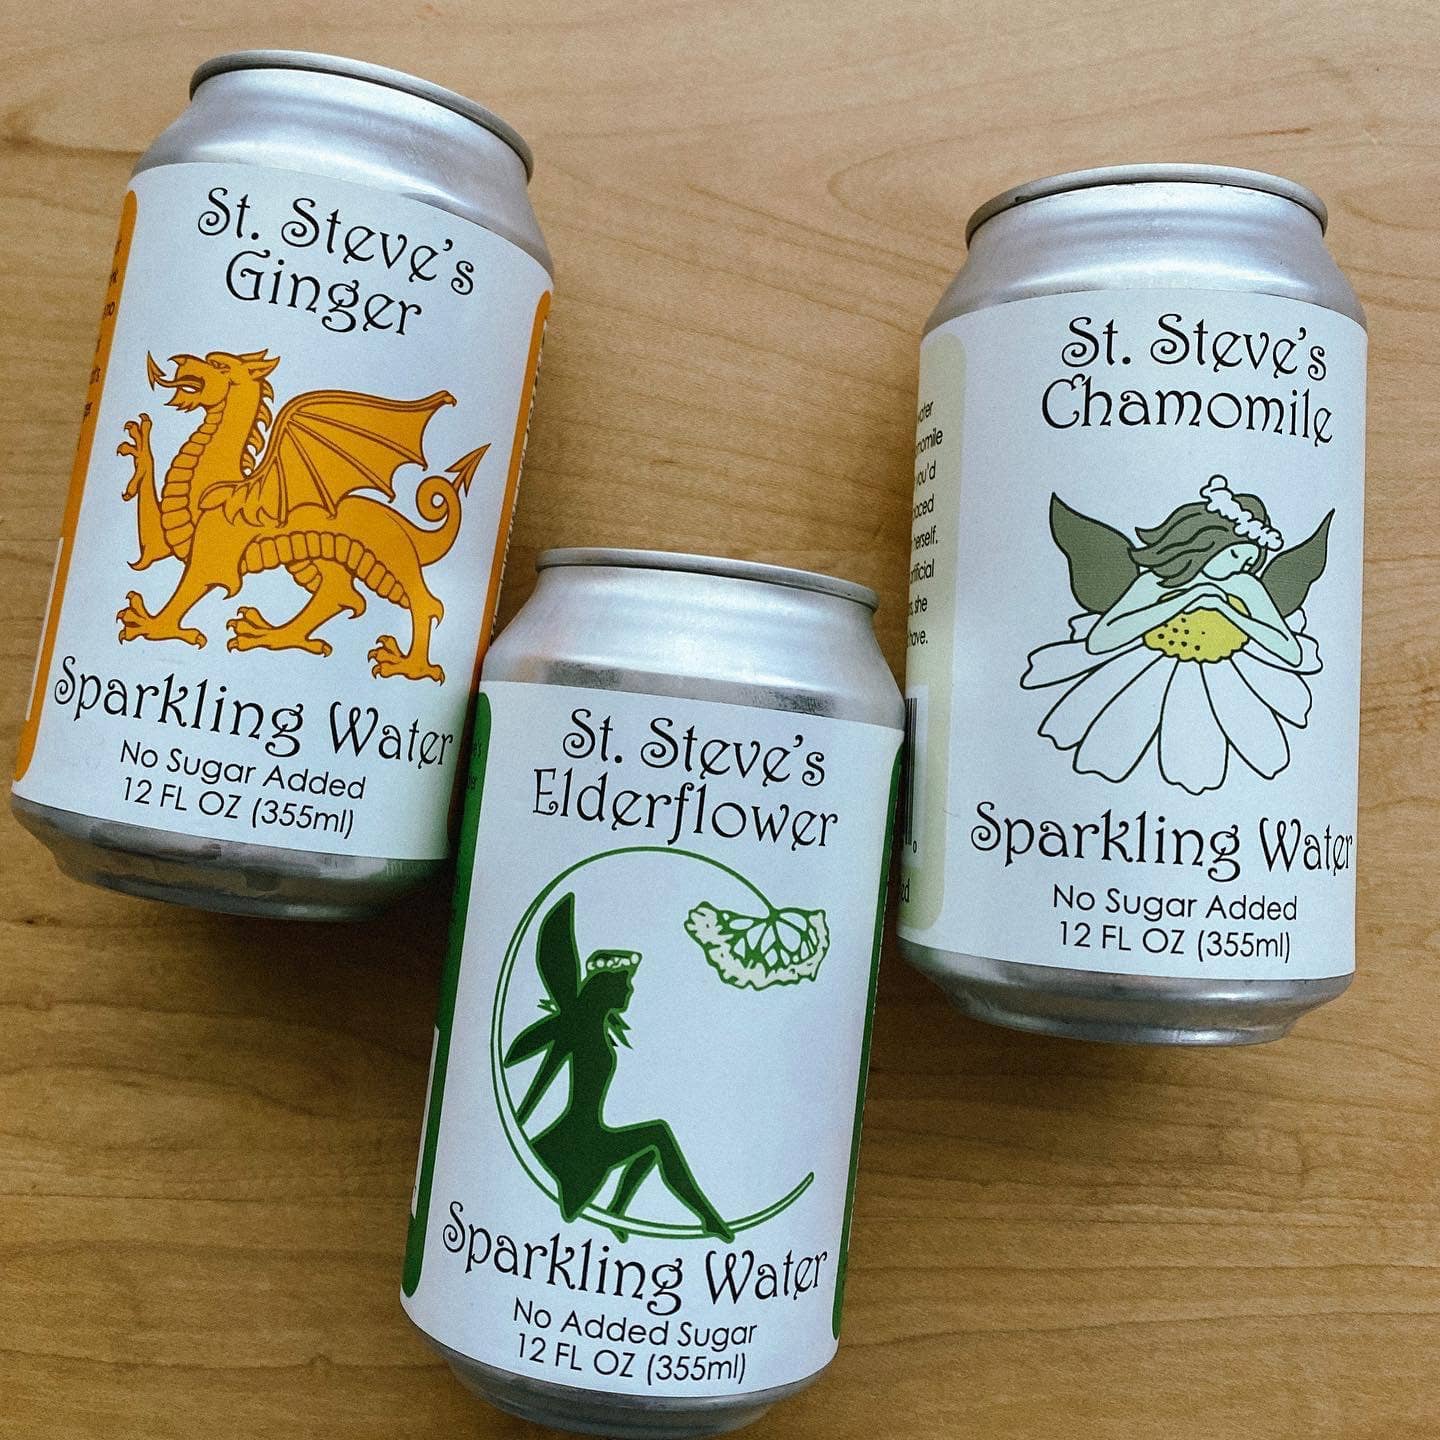 Herbal Sparkling Water by St. Steve's